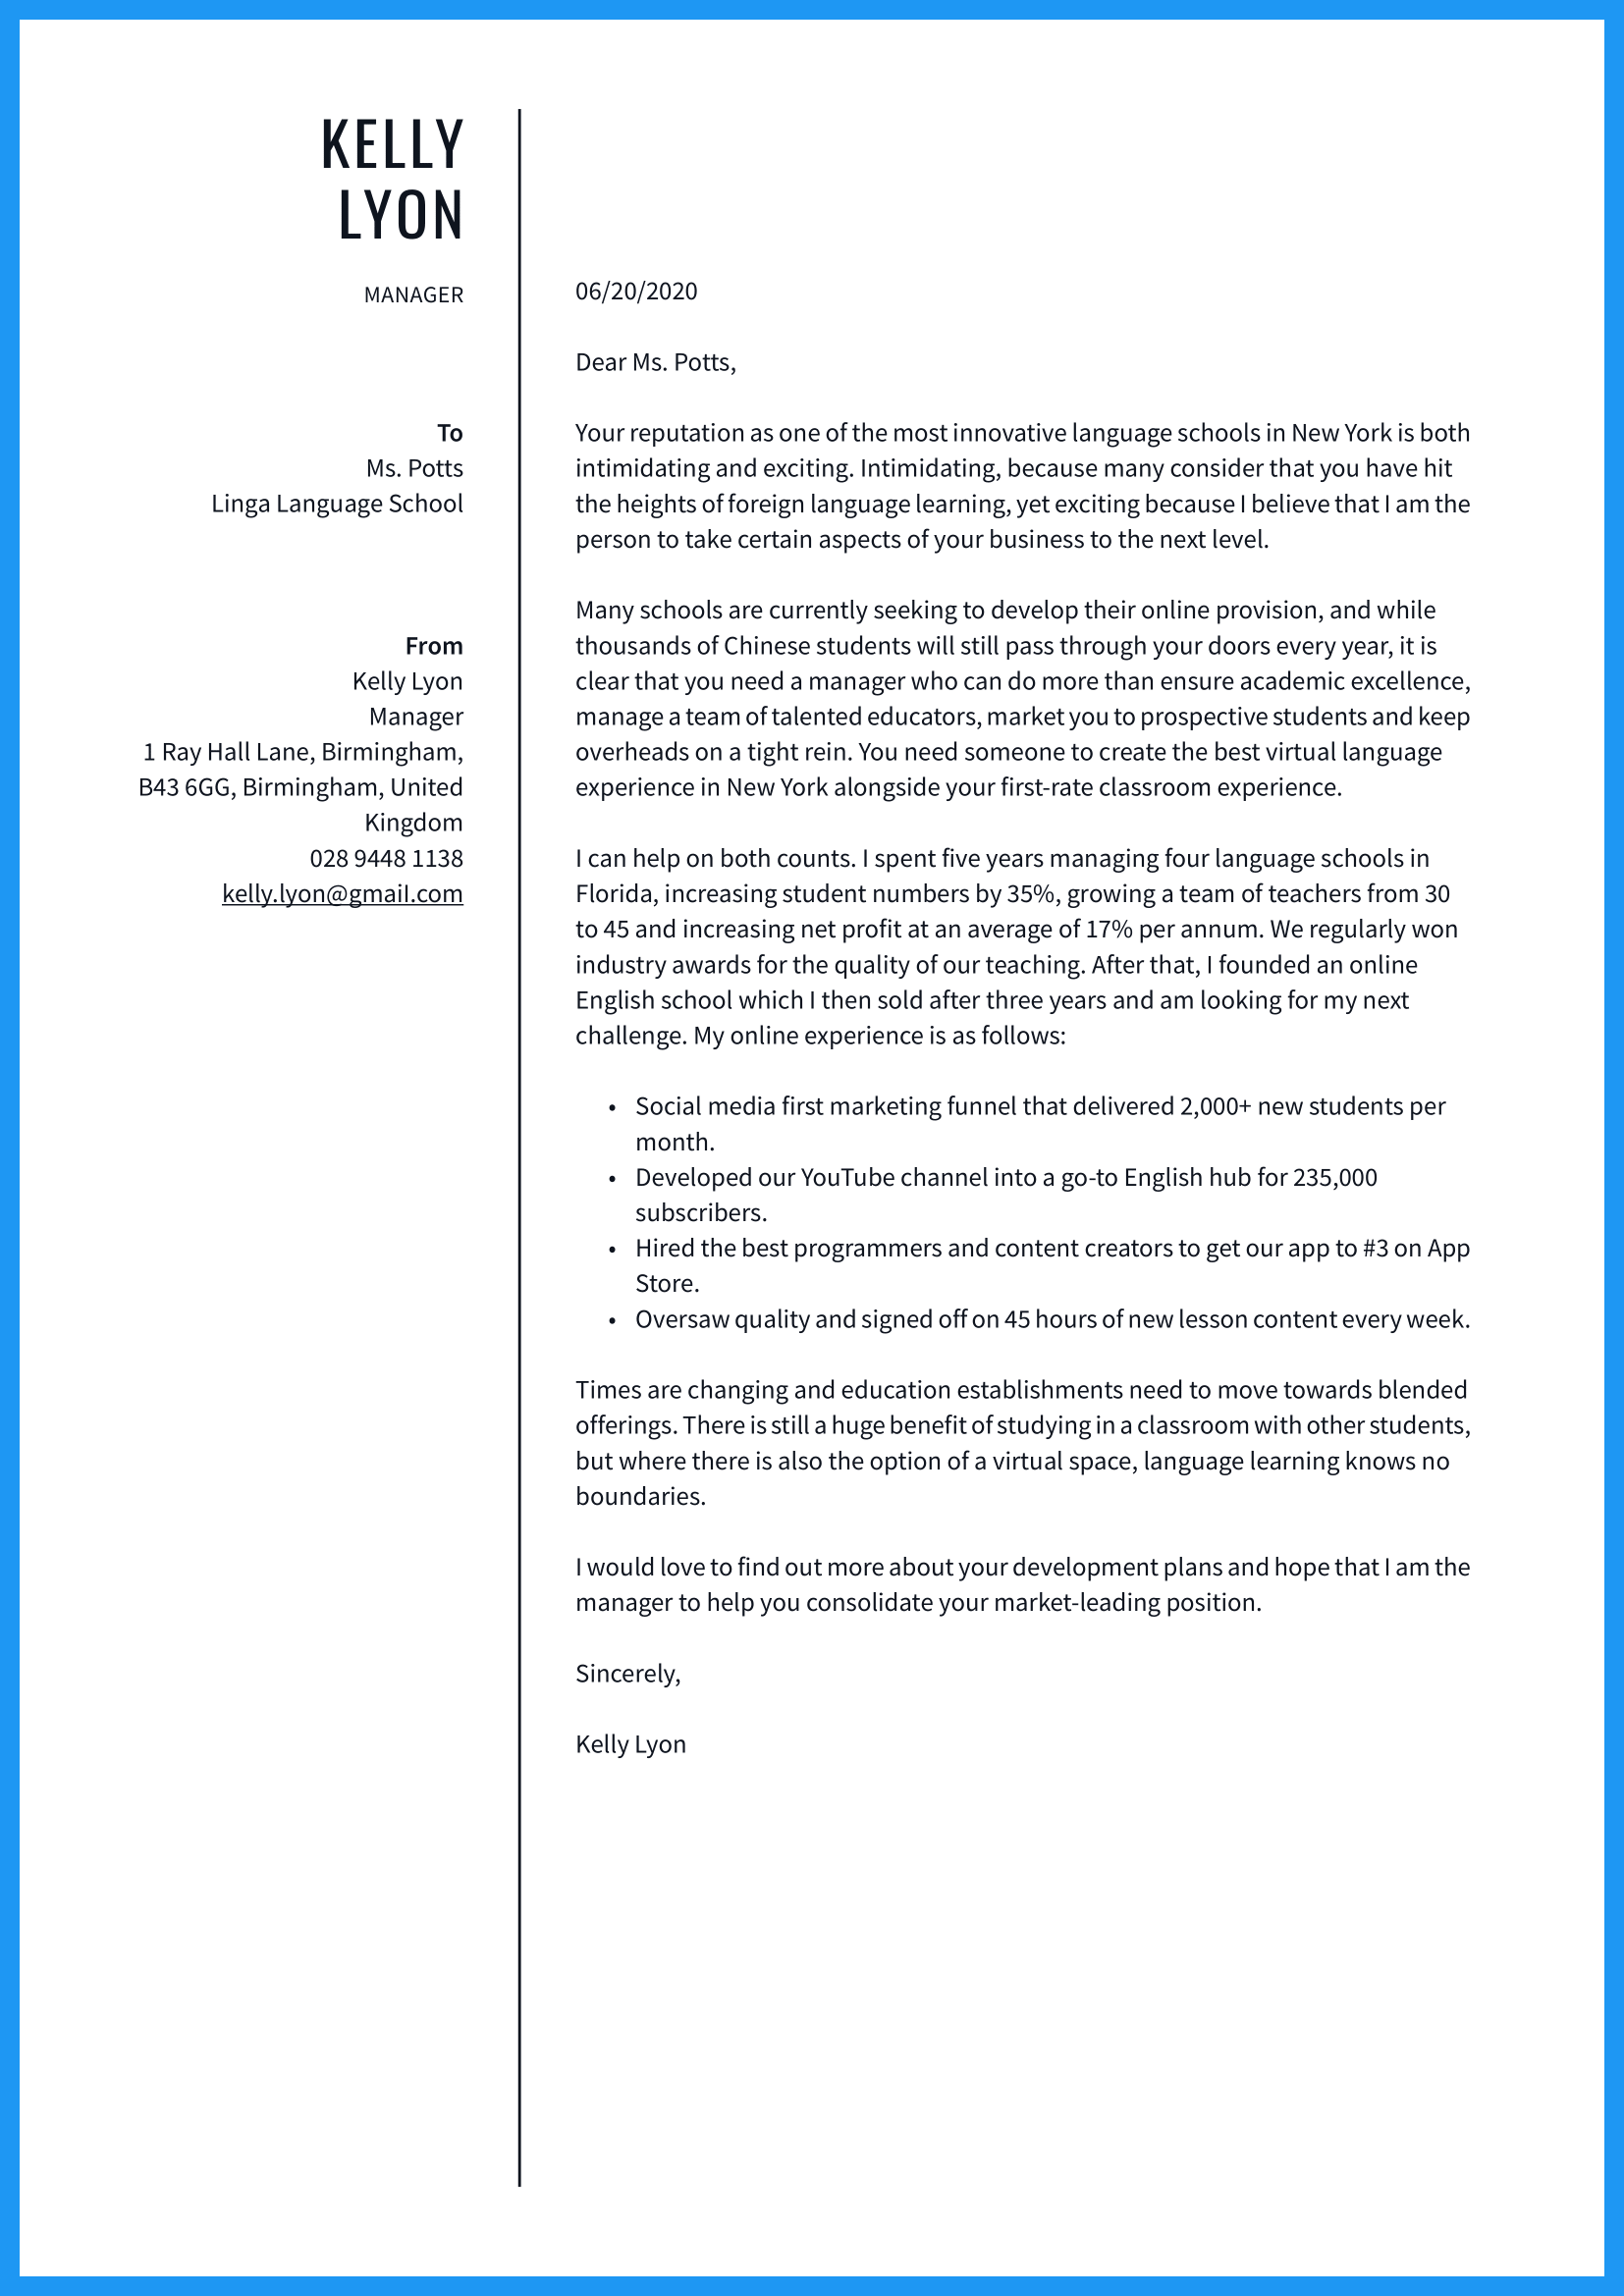 5 formatting guidelines for a cover letter